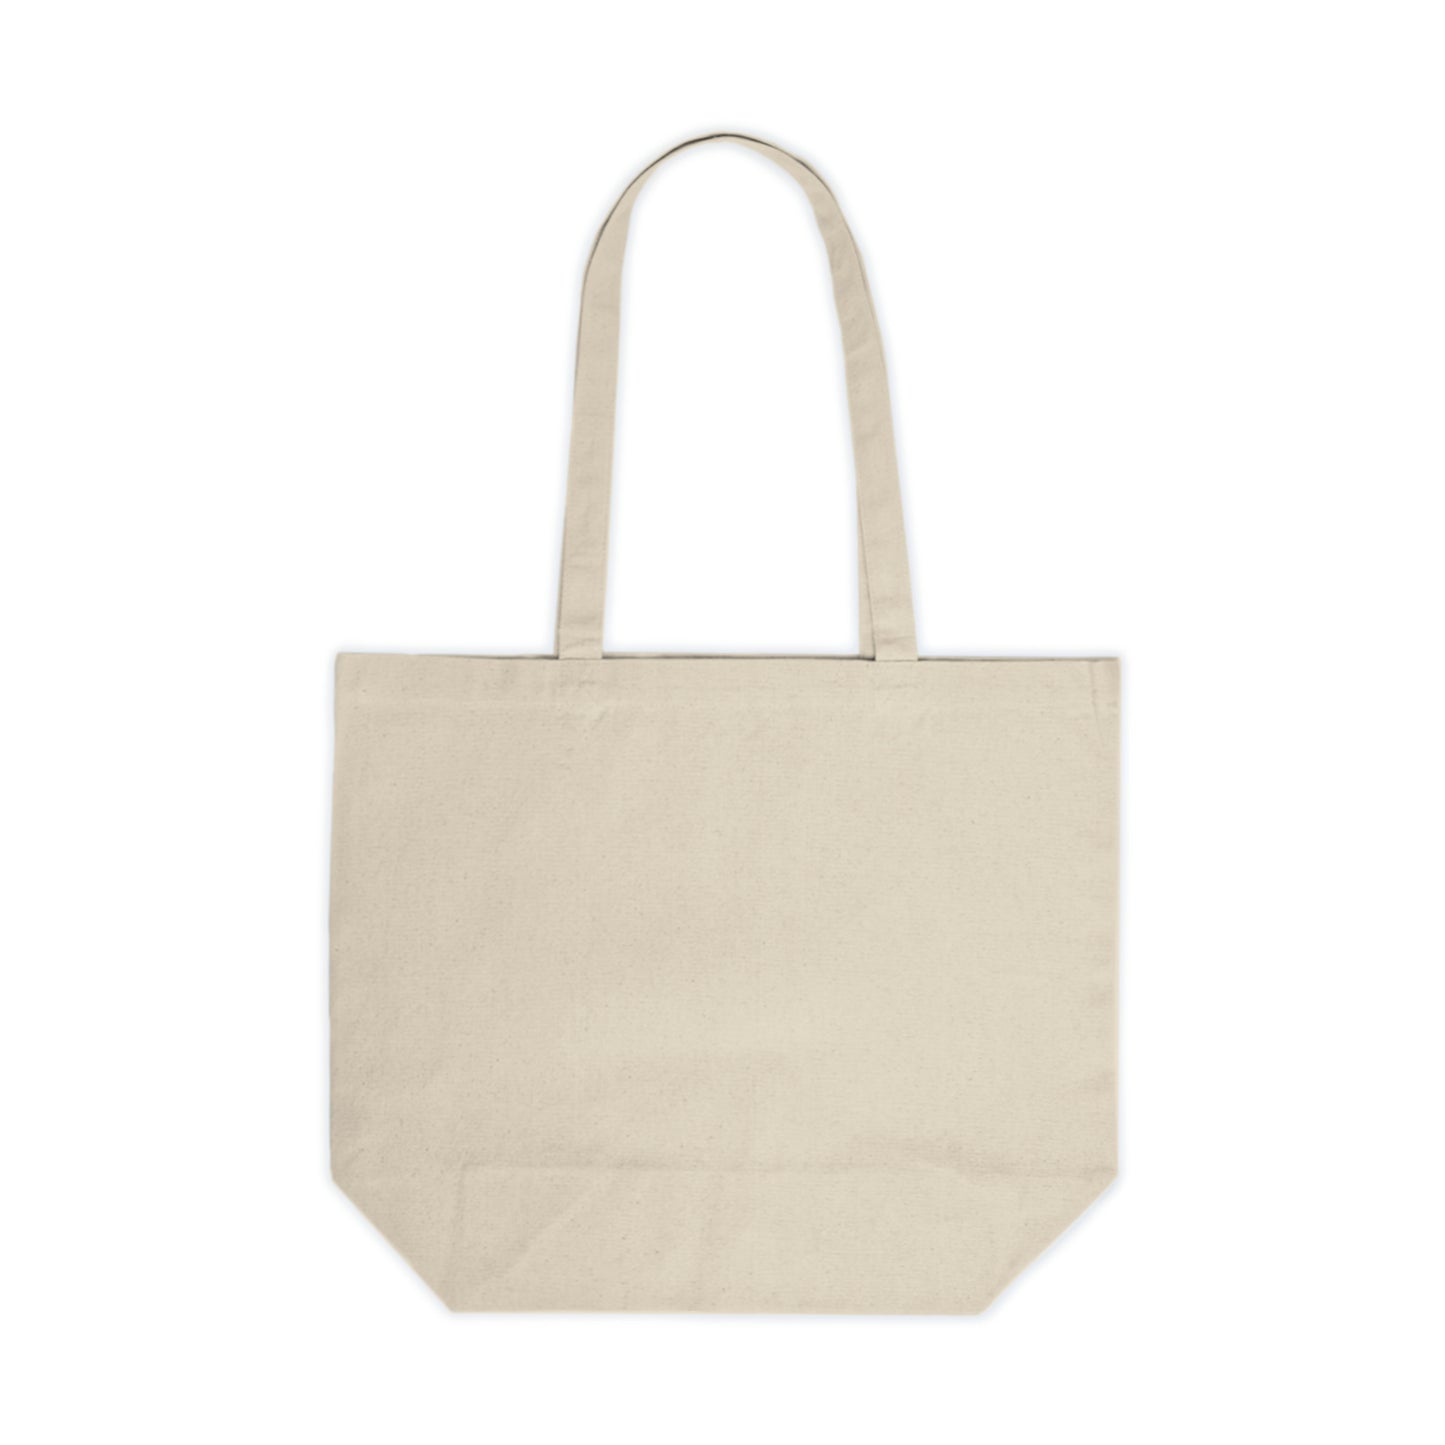 We The Patriots USA Canvas Tote Bag